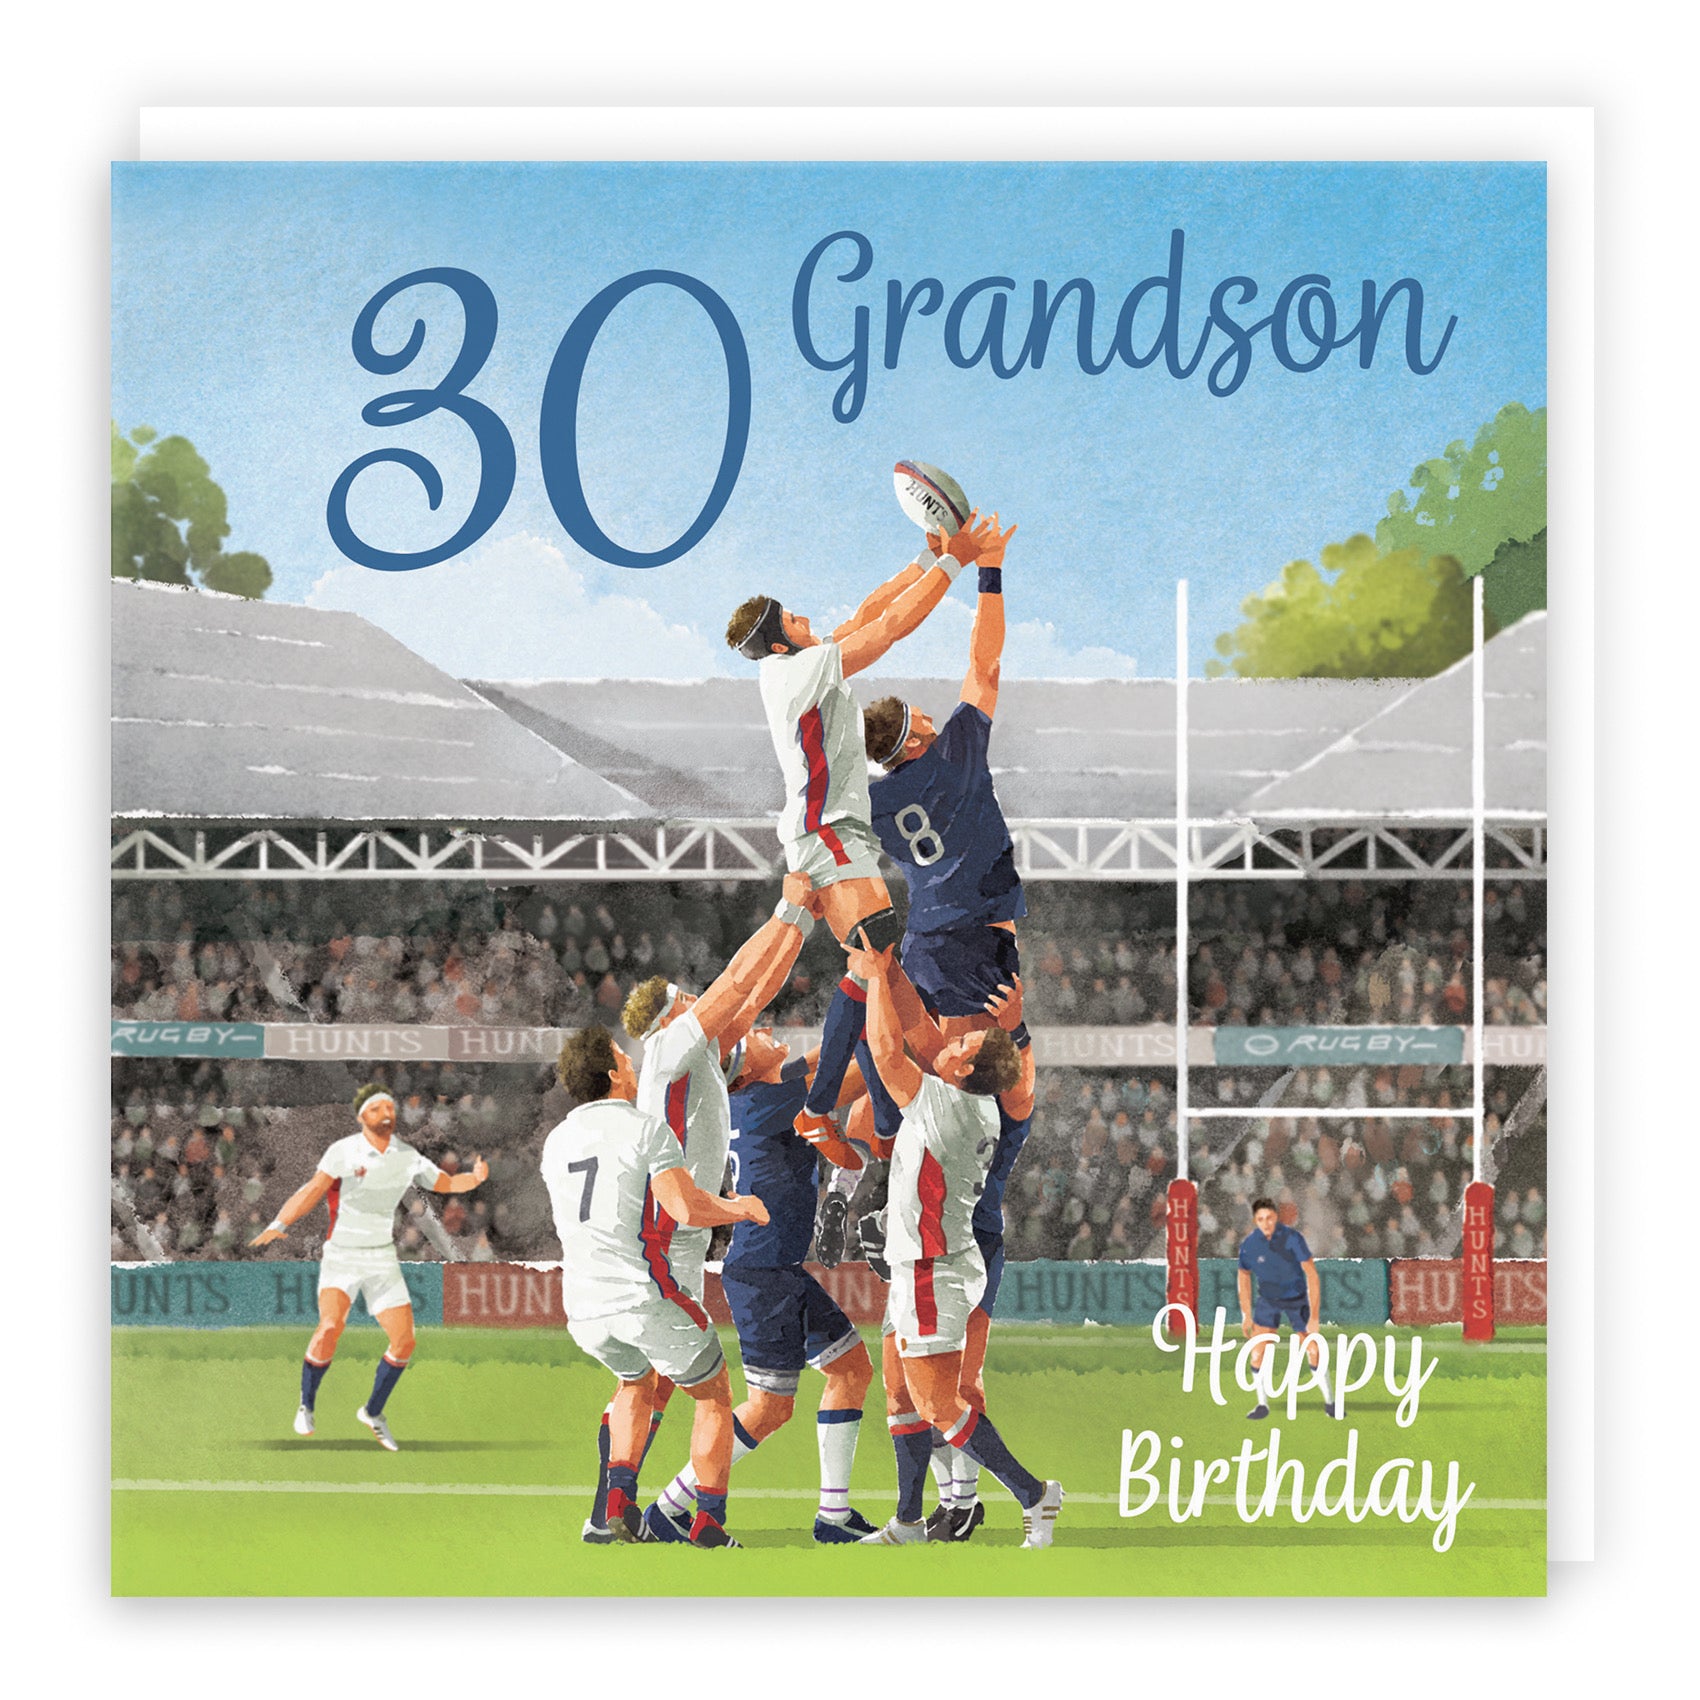 30th Grandson Rugby Birthday Card Milo's Gallery - Default Title (B0CPR54D1S)